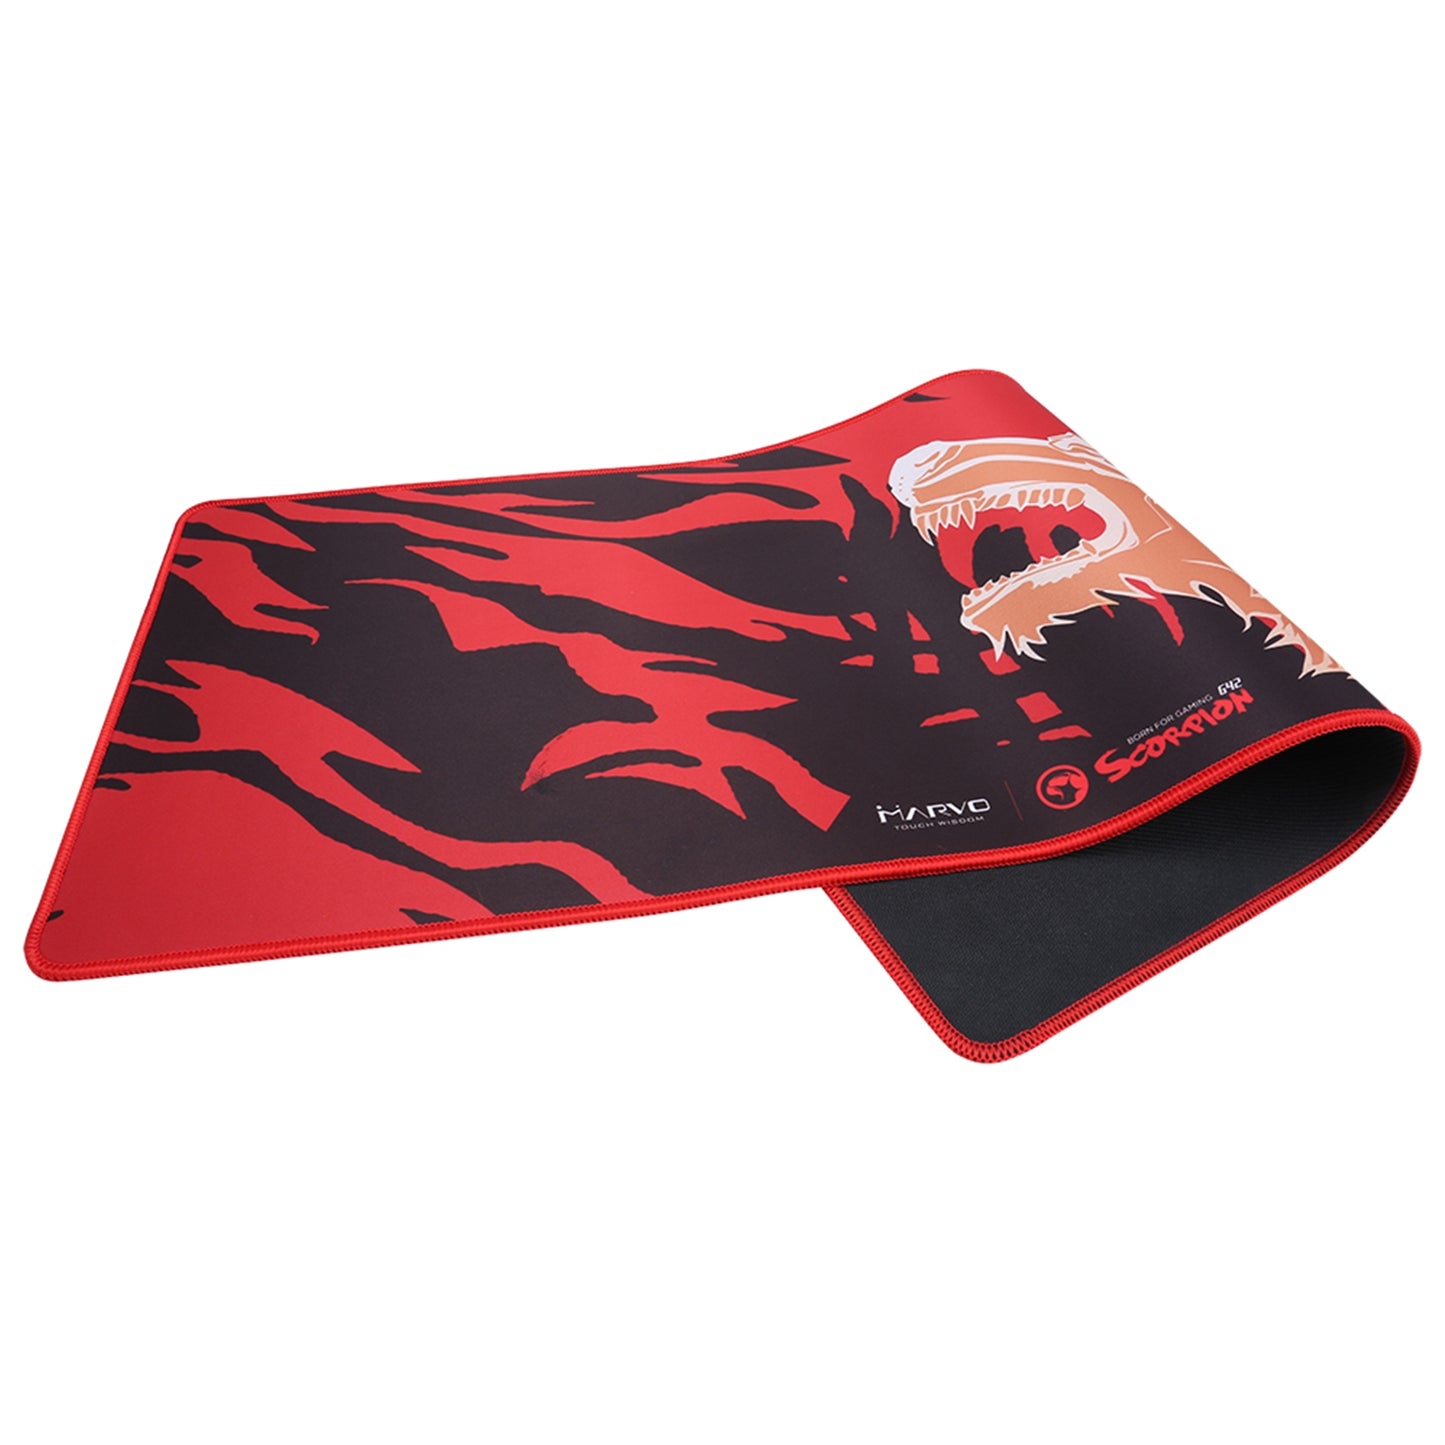 Marvo G42 Red and Black Gaming Mouse Pad XL 770x295x3mm, Waterproof, Smooth Surface for Optimal Gaming